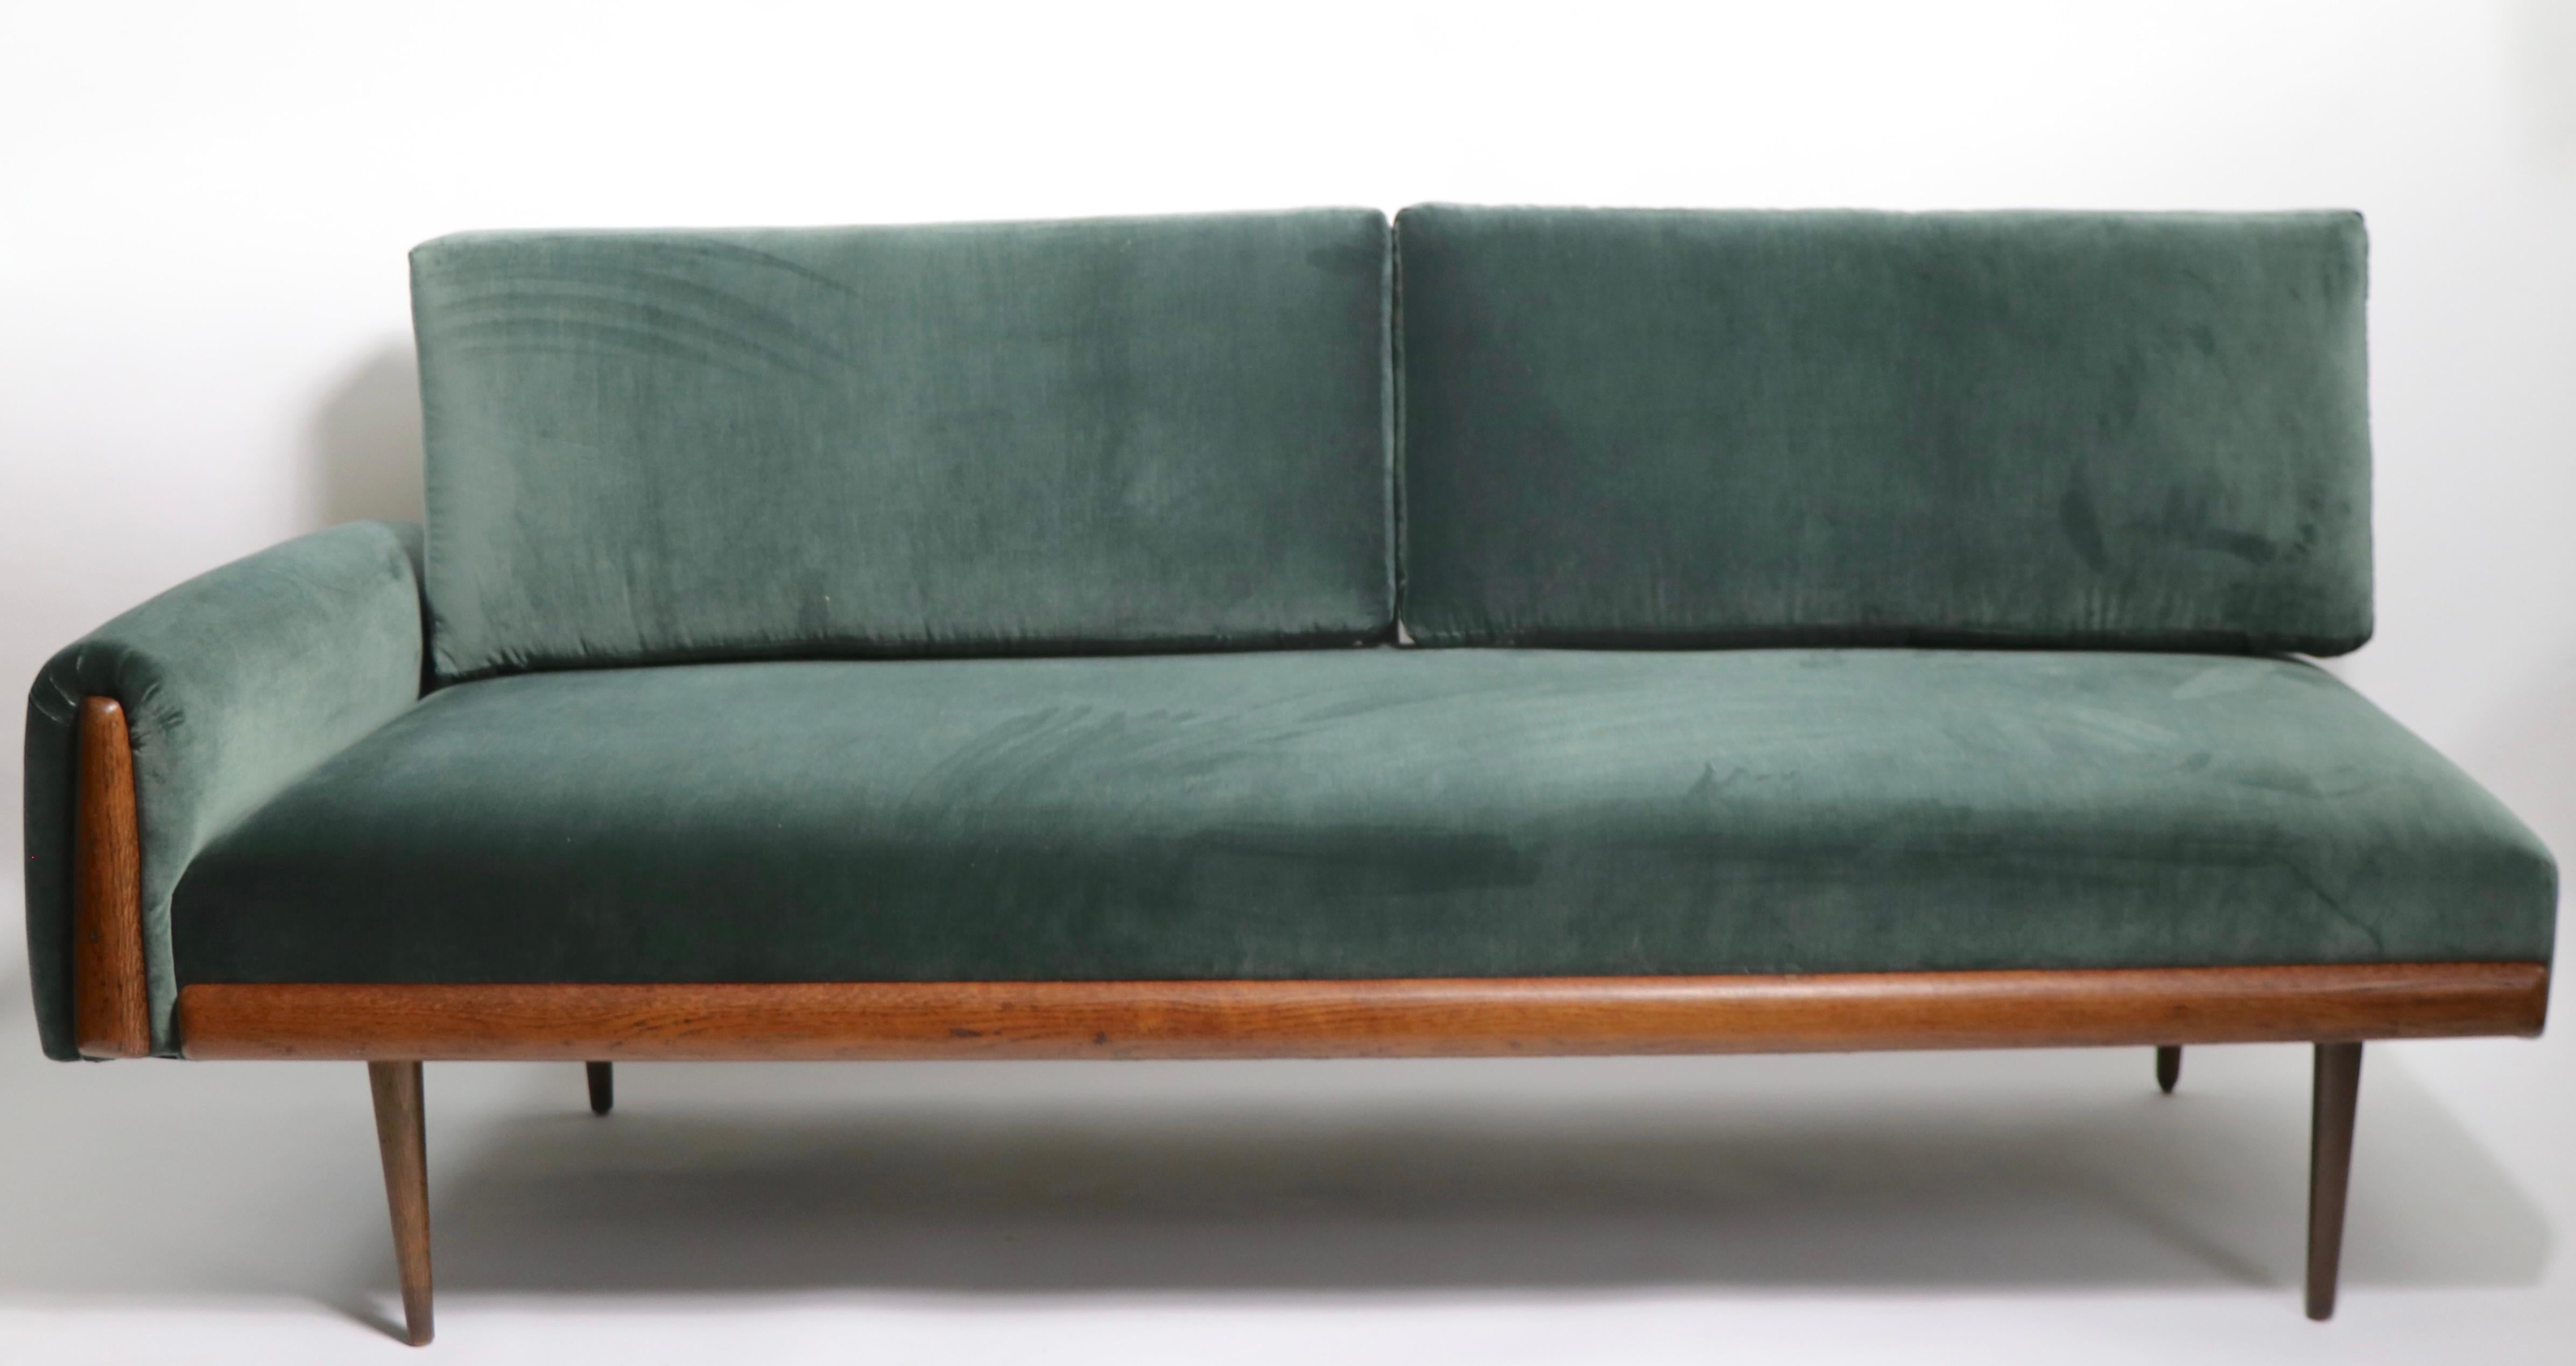 Classic mid-century daybed, sofa in excellent restored condition. The sofa has an asymmetrical design, having an armrest on one side ( 23.5 H in. ) and an open end on the other, on tapered pole legs with decorative wood trim.